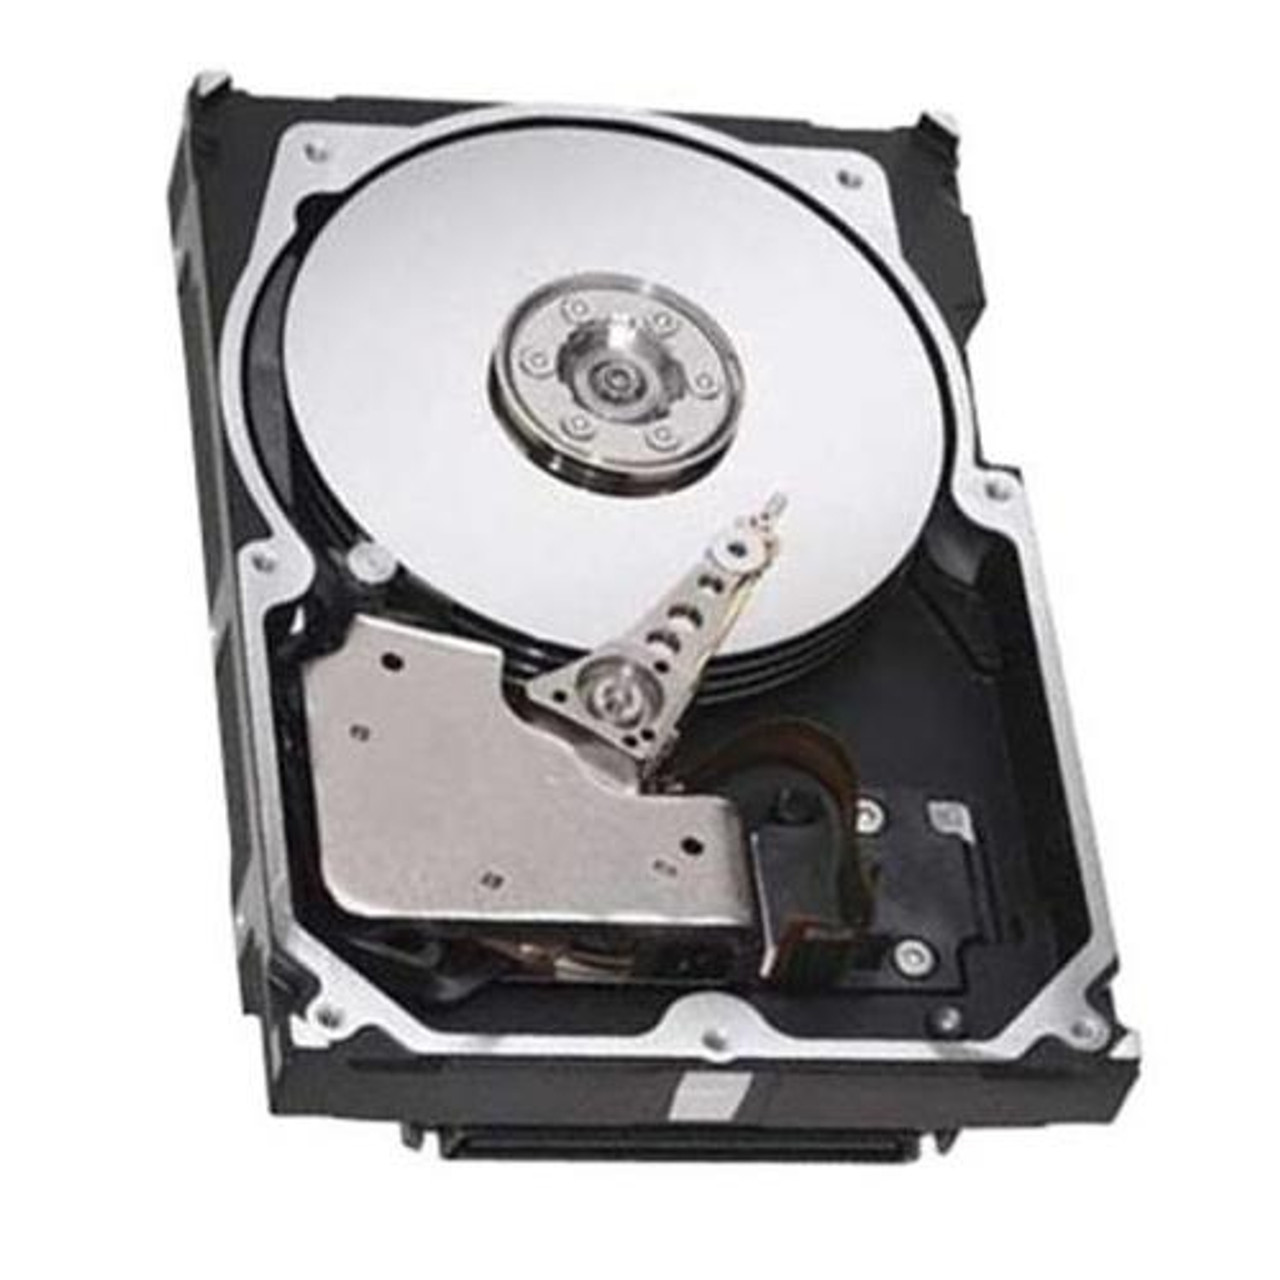 5048602 EMC 146GB 15000RPM Fibre Channel 2Gbps 8MB Cache 3.5-inch Internal Hard Drive for CLARiiON CX200/ CX700 Series Storage Systems